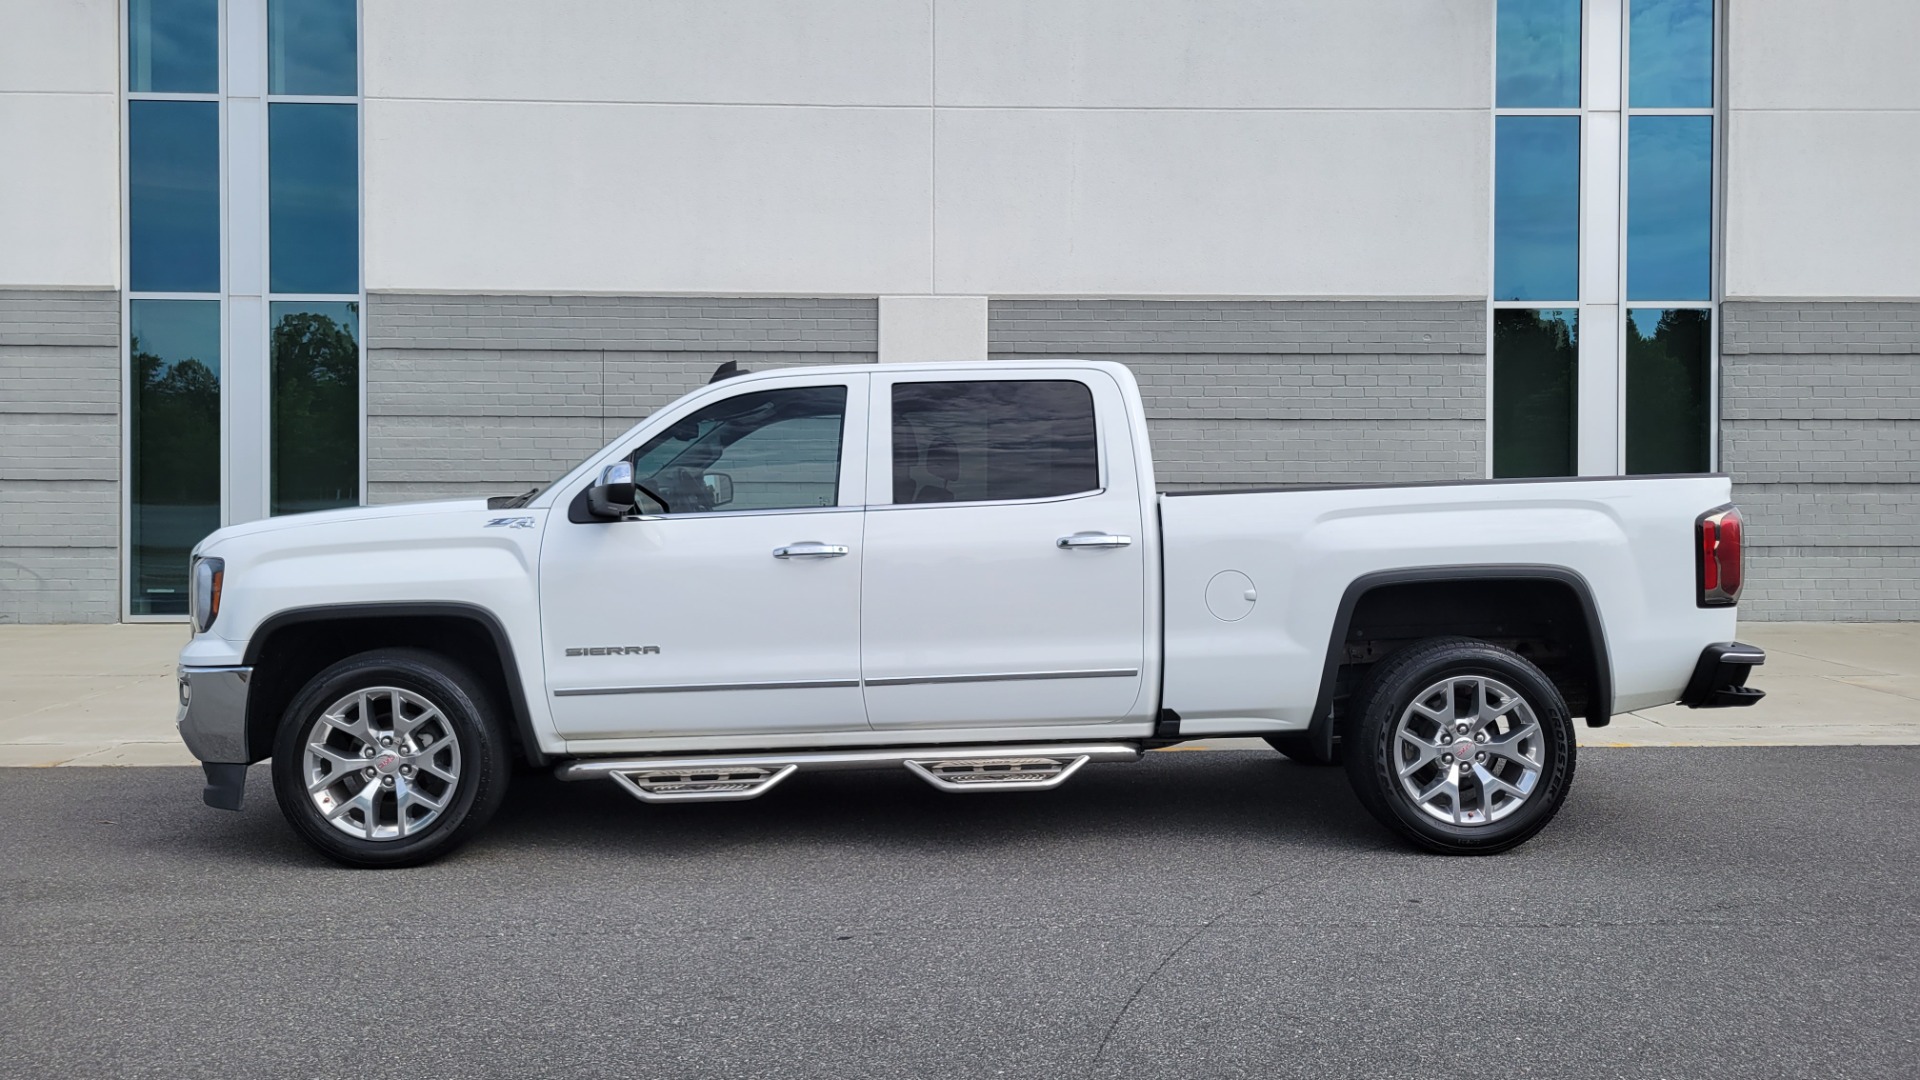 Used 2016 GMC SIERRA 1500 SLT 4X4 Z71 CREWCAB / NAV / BOSE / HTS STS & STRNG WHL / CAMERA for sale $29,695 at Formula Imports in Charlotte NC 28227 4